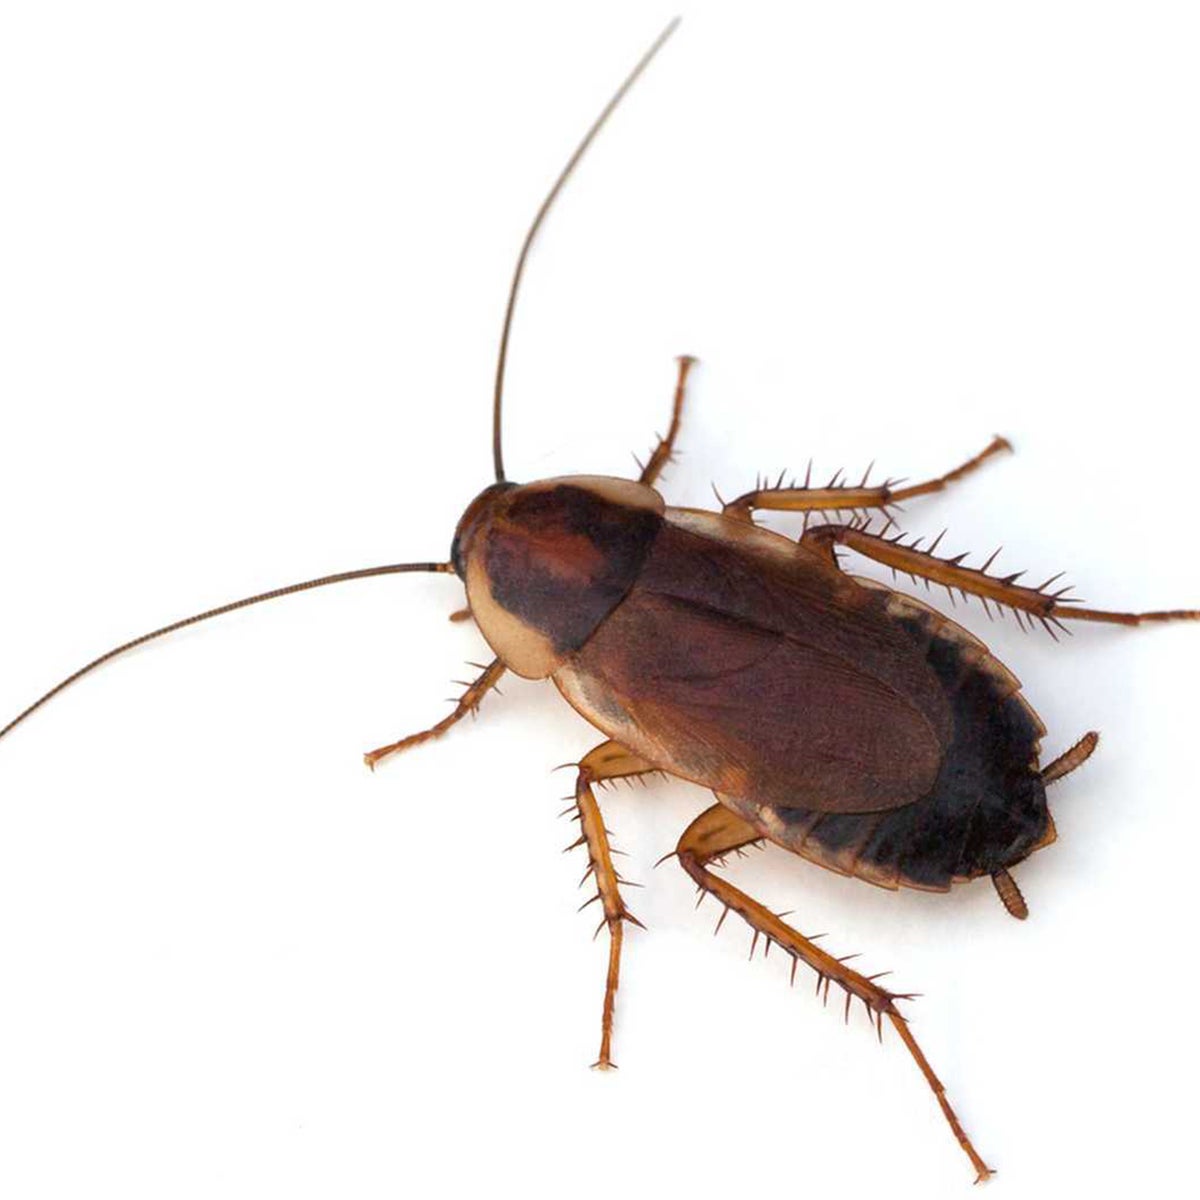 Doctors find live cockroach in woman's skull after she reports ...